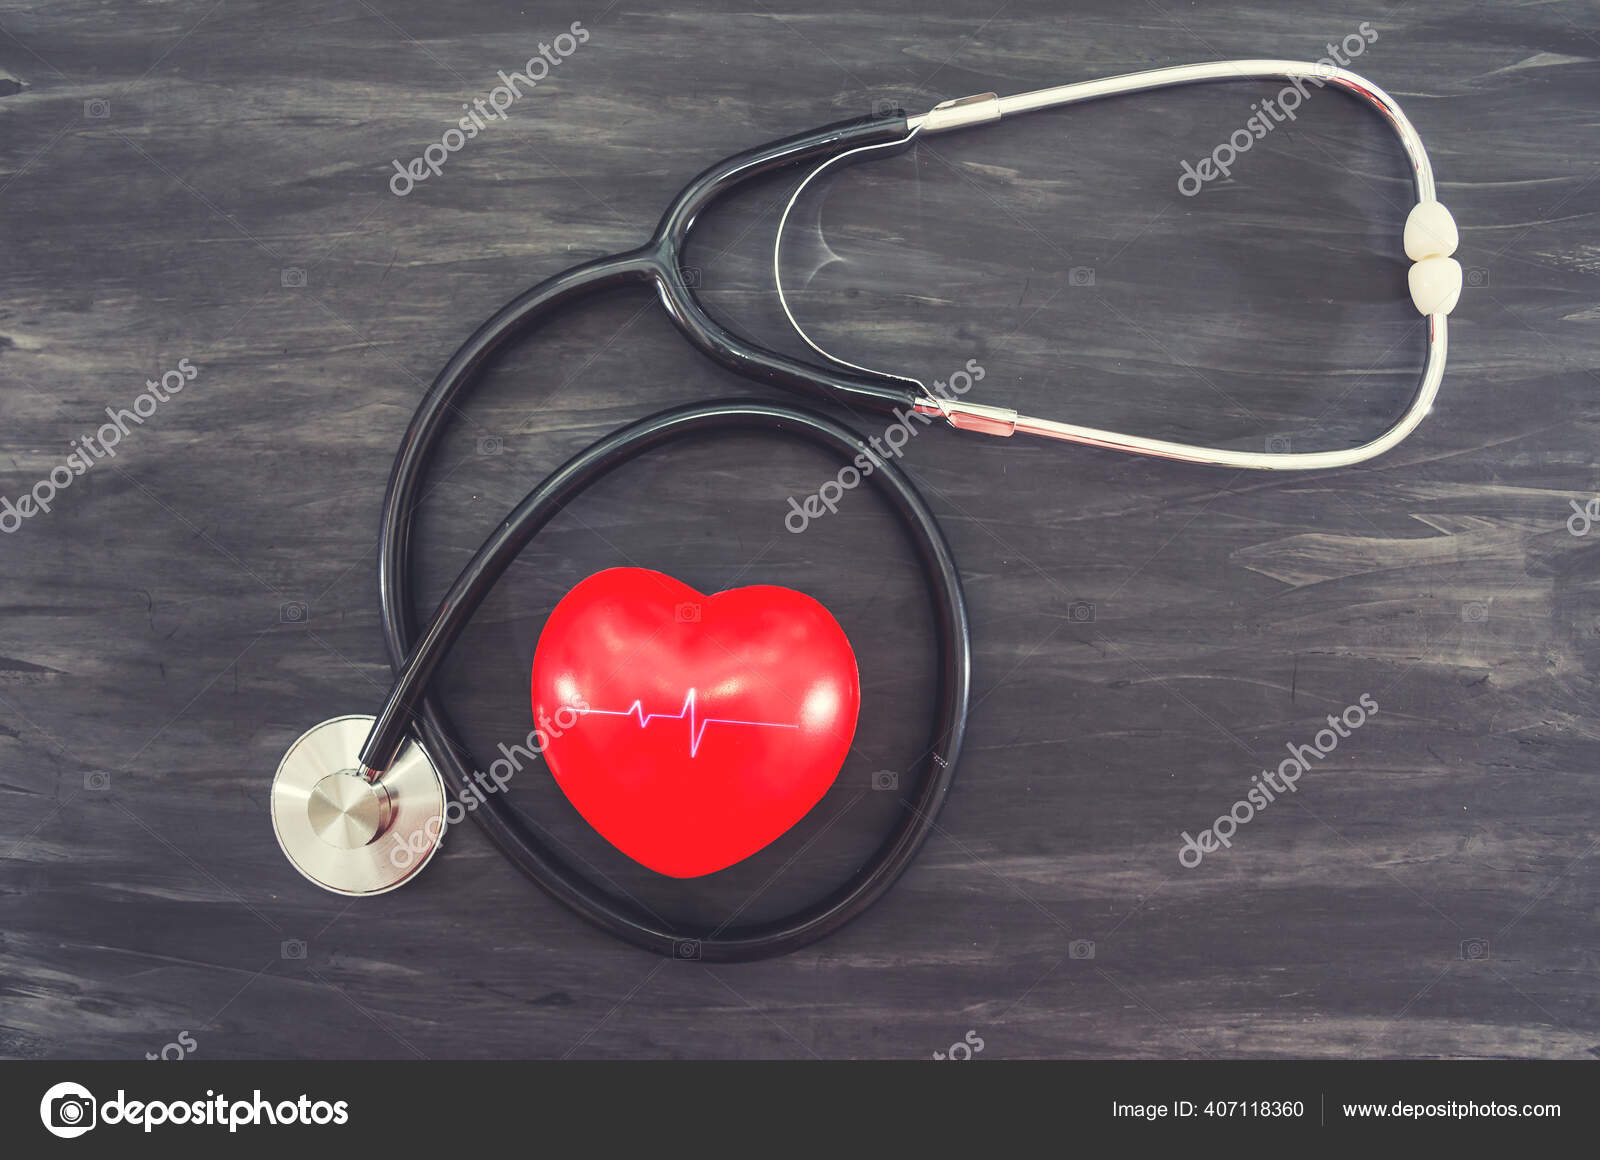 Red Heart Stethoscope Black Background Health Concept Stock Photo by  ©@ 407118360